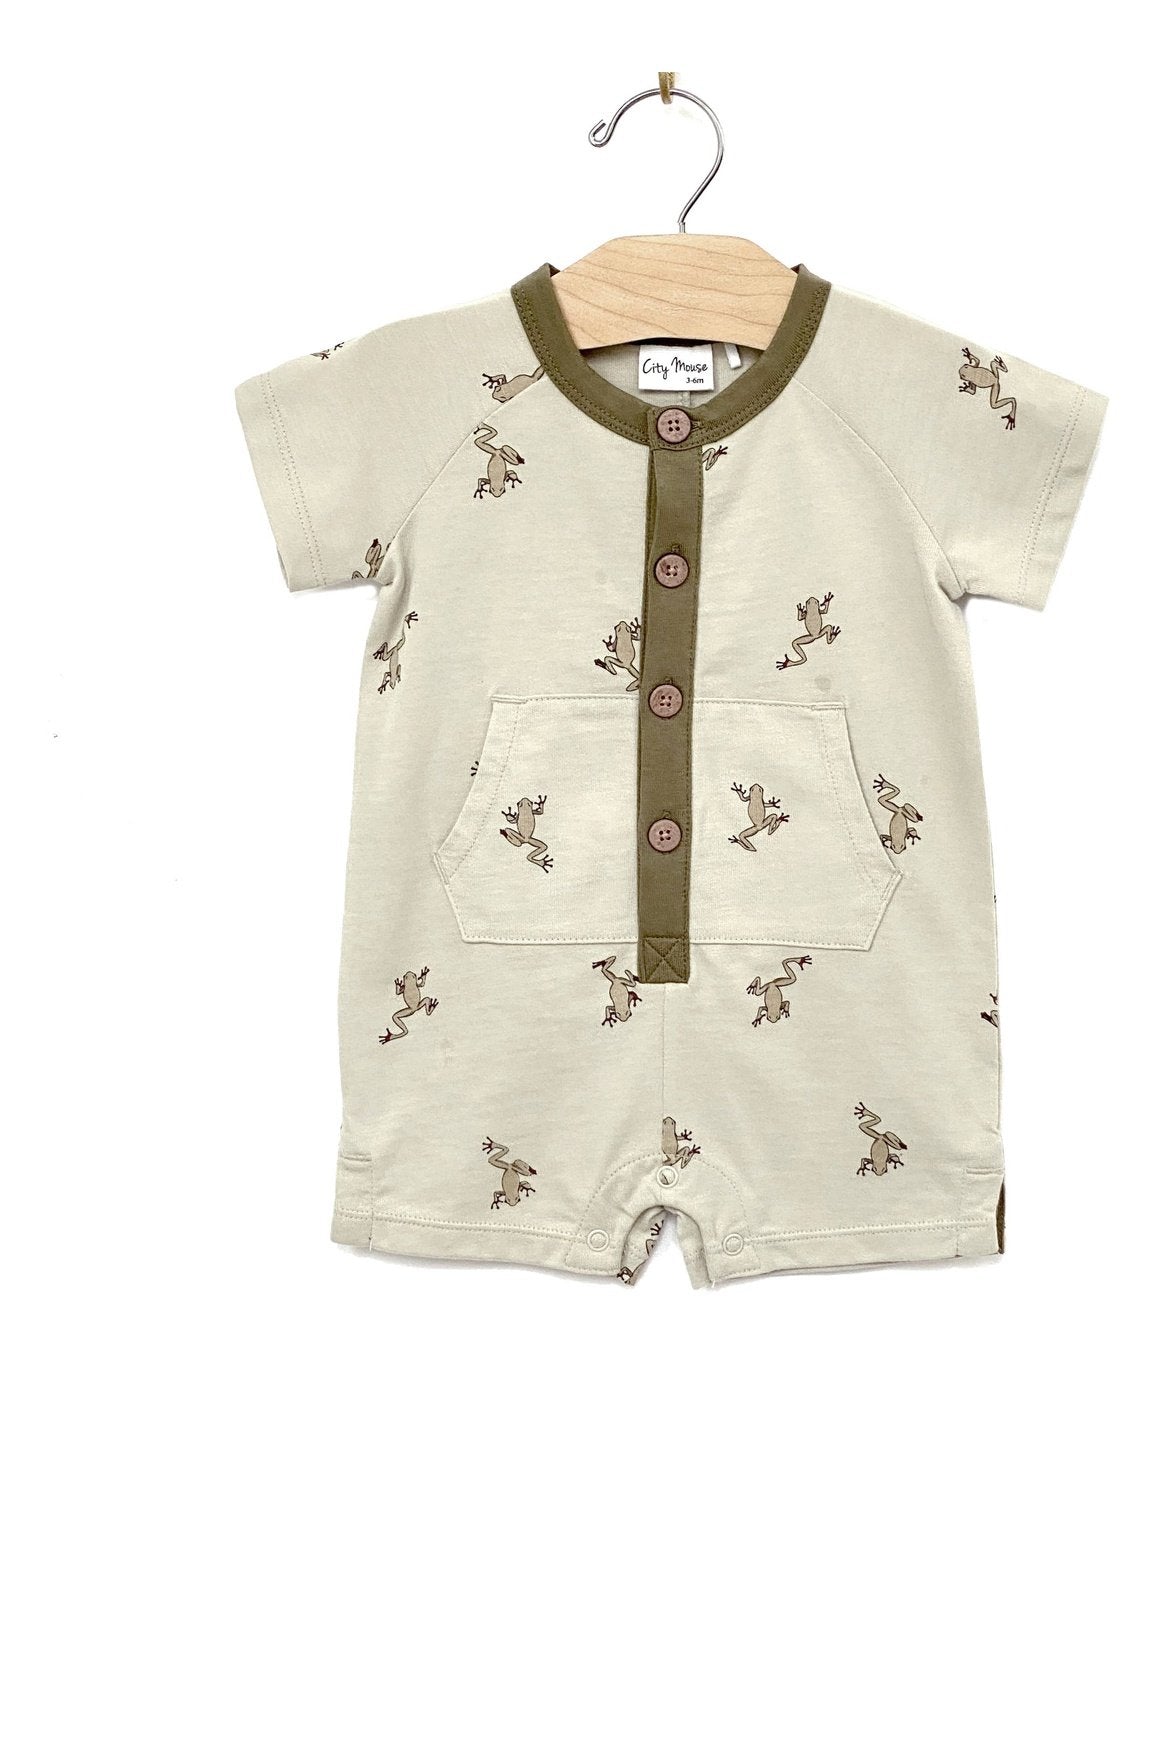 Frogs Henley Shorts Romper Tea for Three: A Children's Boutique